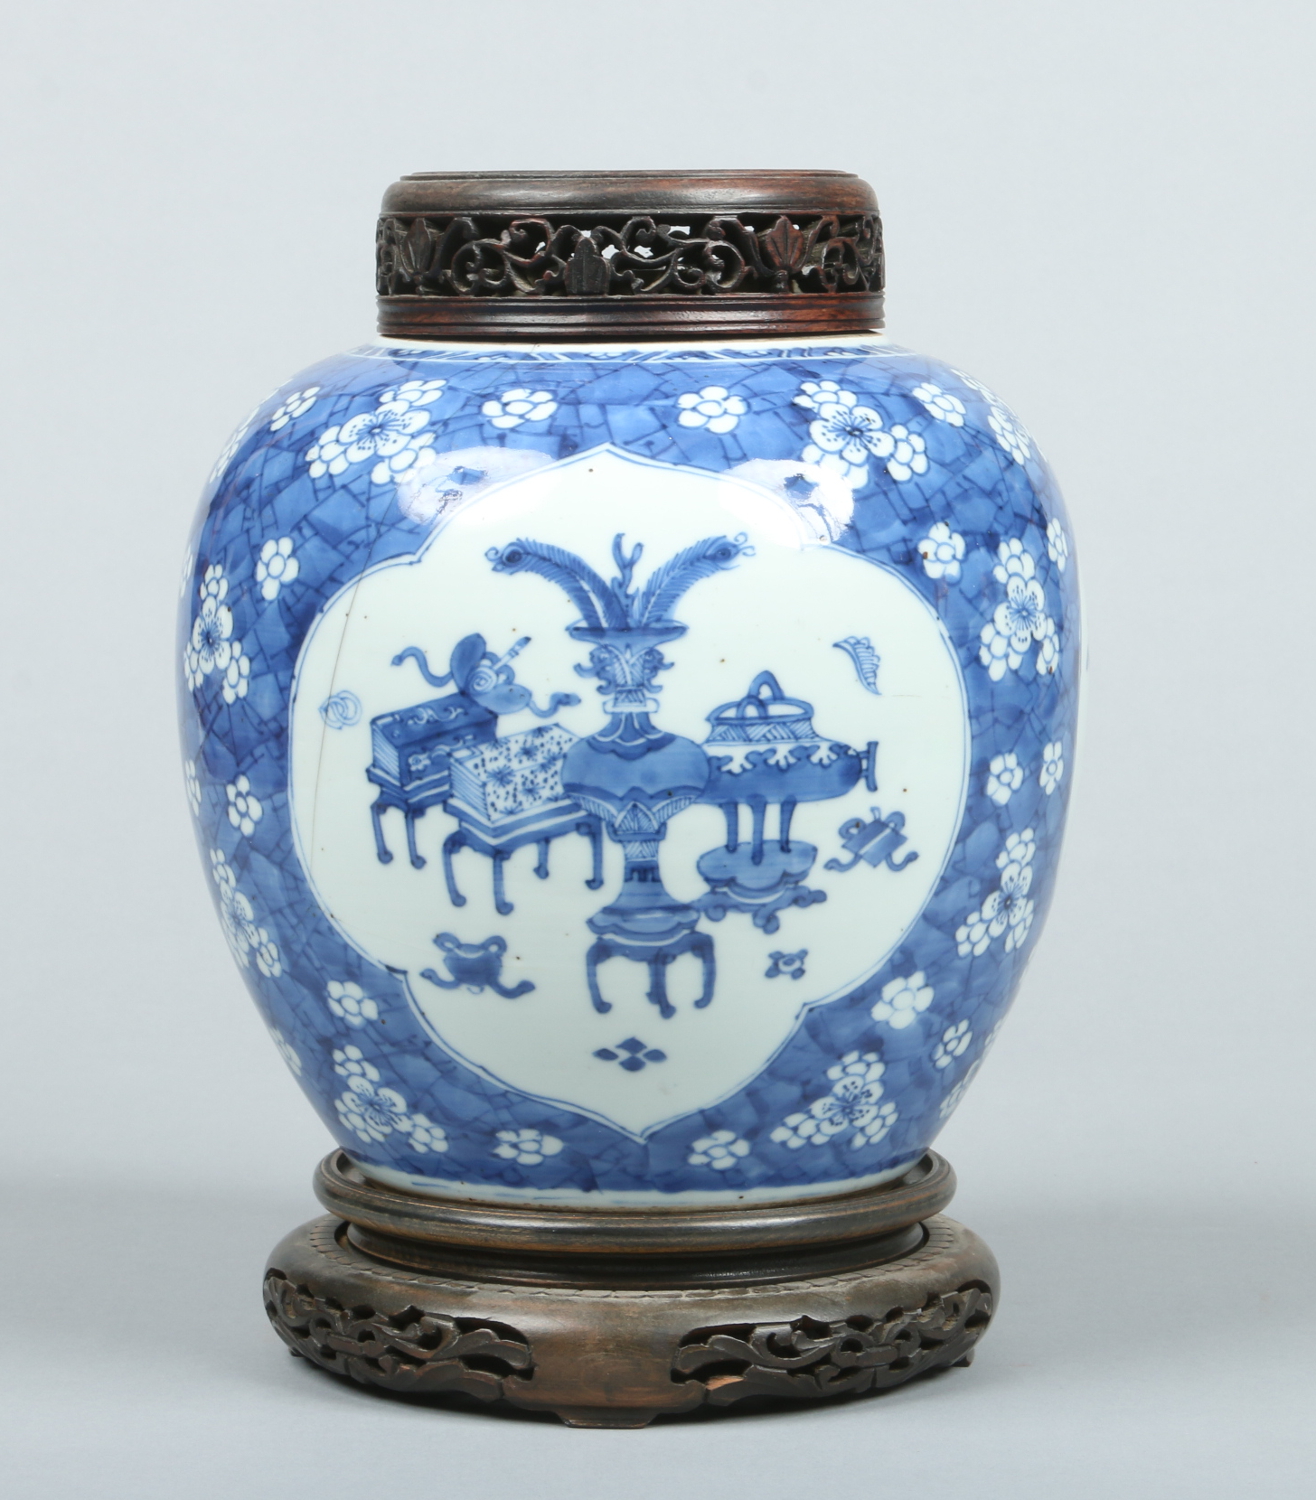 A Chinese Kangxi (1662-1722) blue and white ginger jar with pierced hardwood cover and stand.